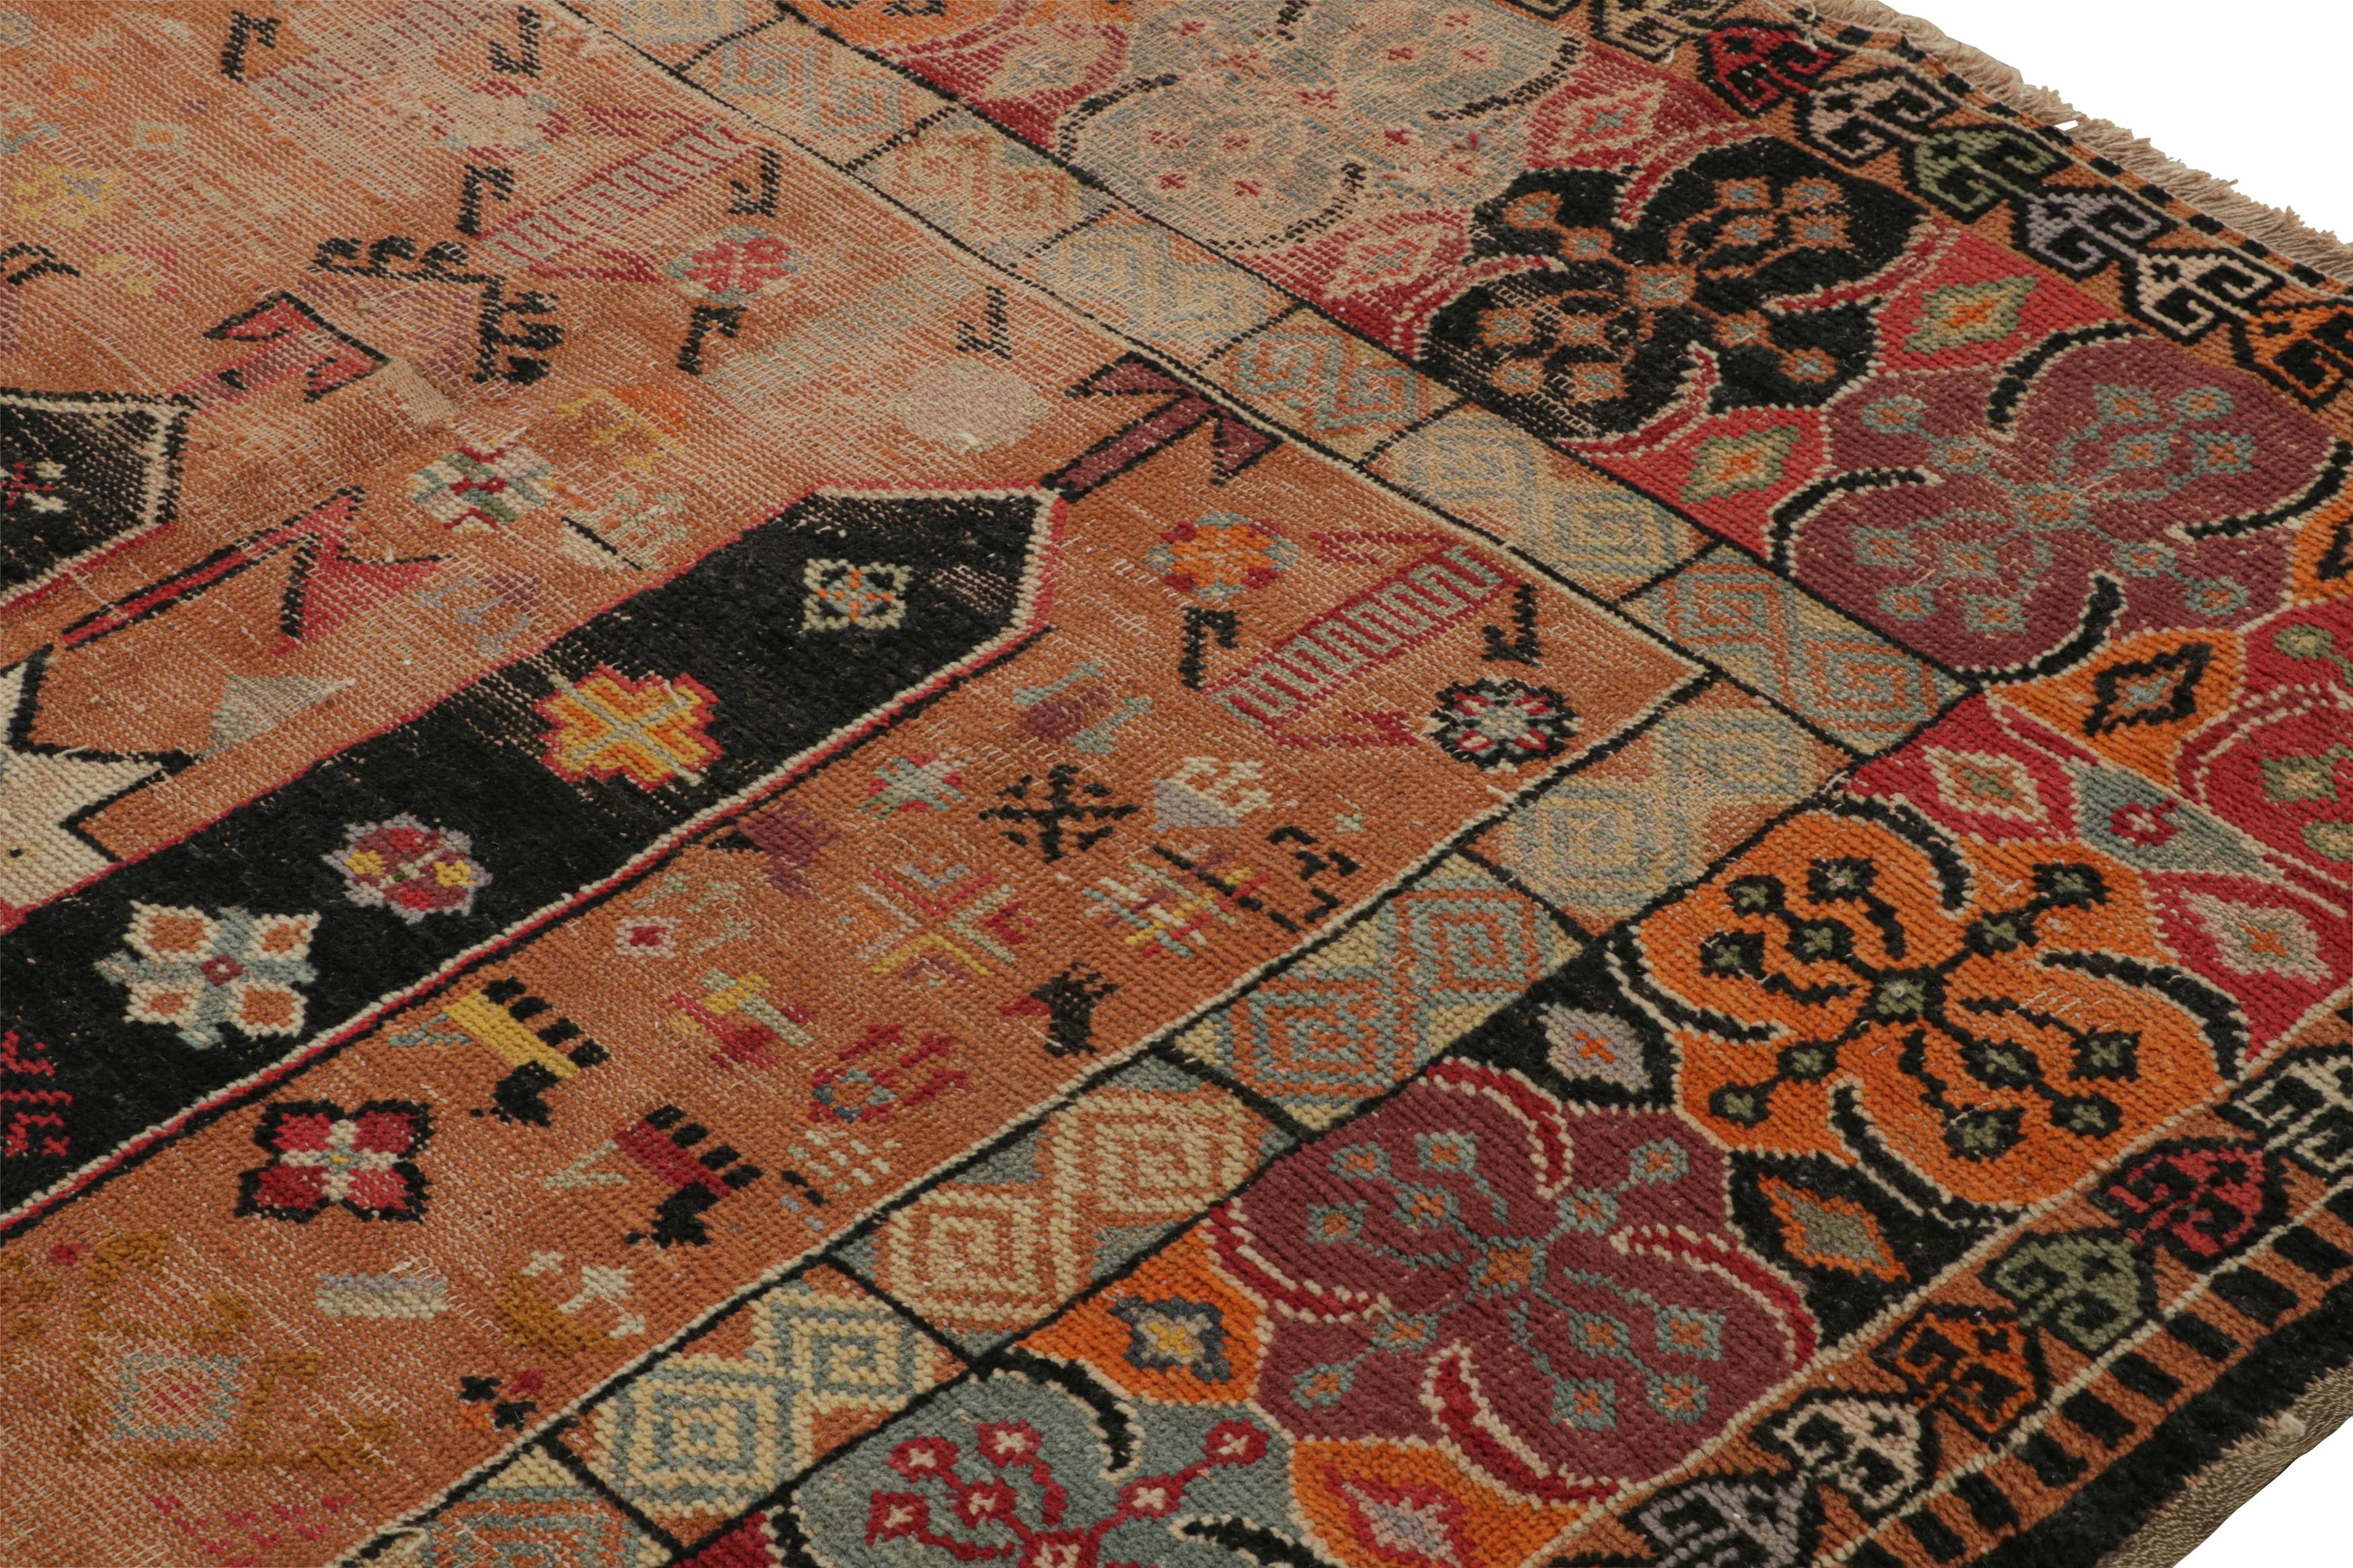 Late 19th Century 1890s Antique European Rug with Colorful Geometric Patterns, from Rug & Kilim For Sale